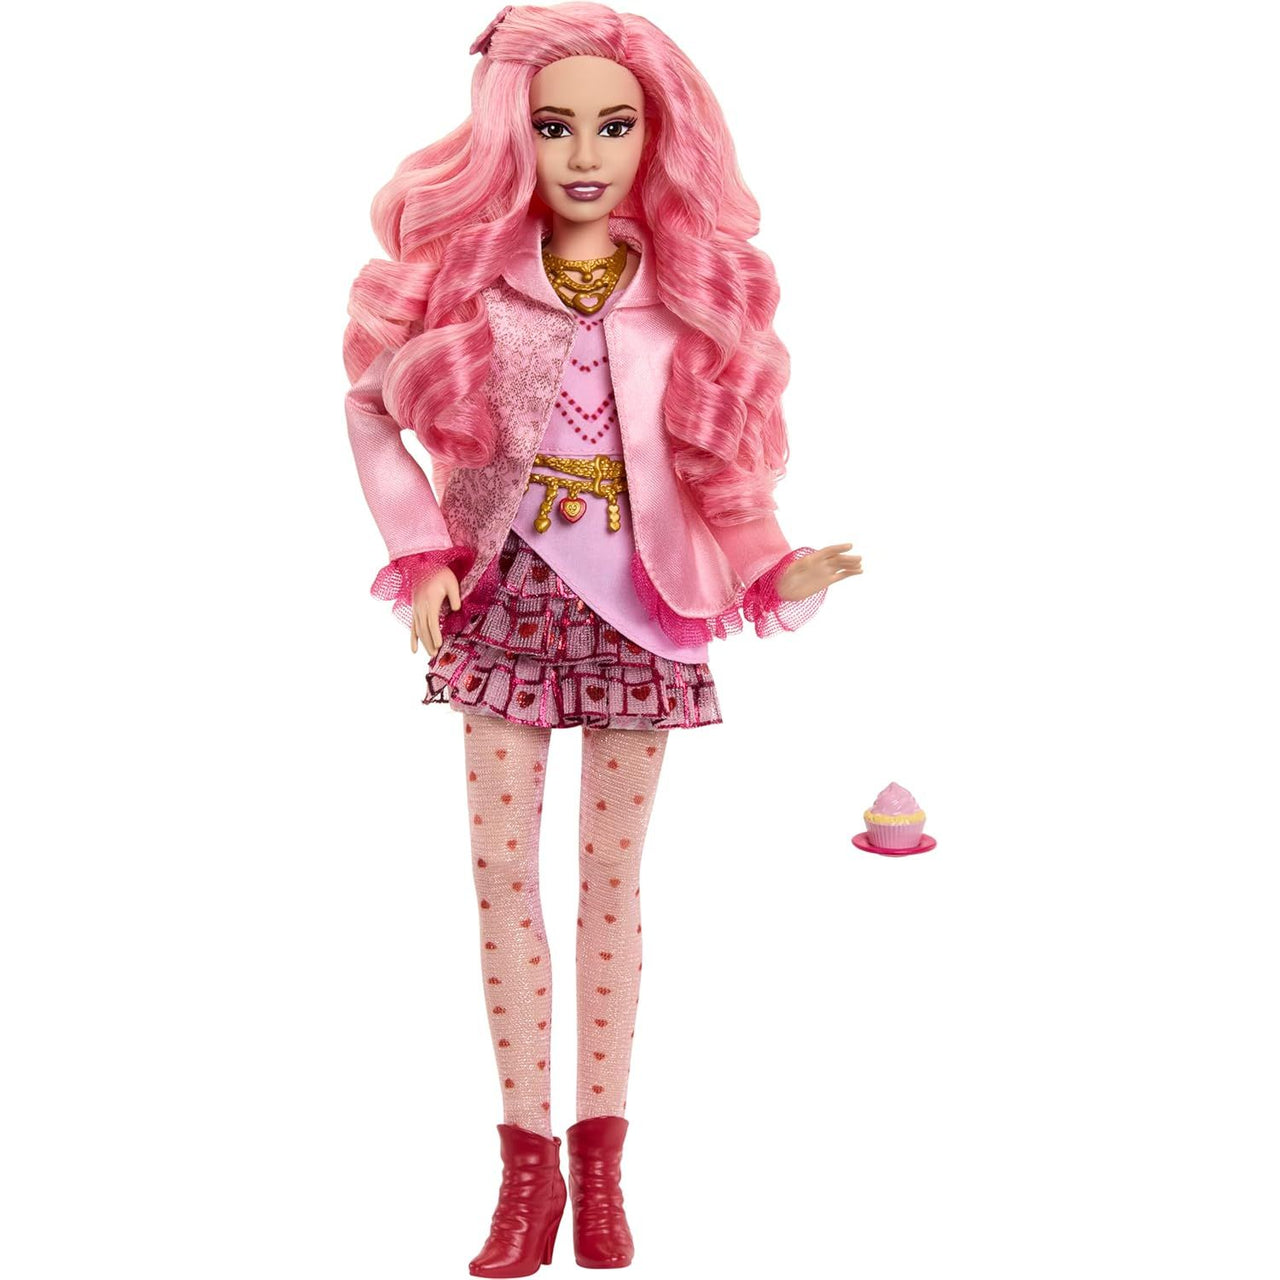 Disney Descendants The Rise of Red Bridget Young Queen of Hearts Doll Disney